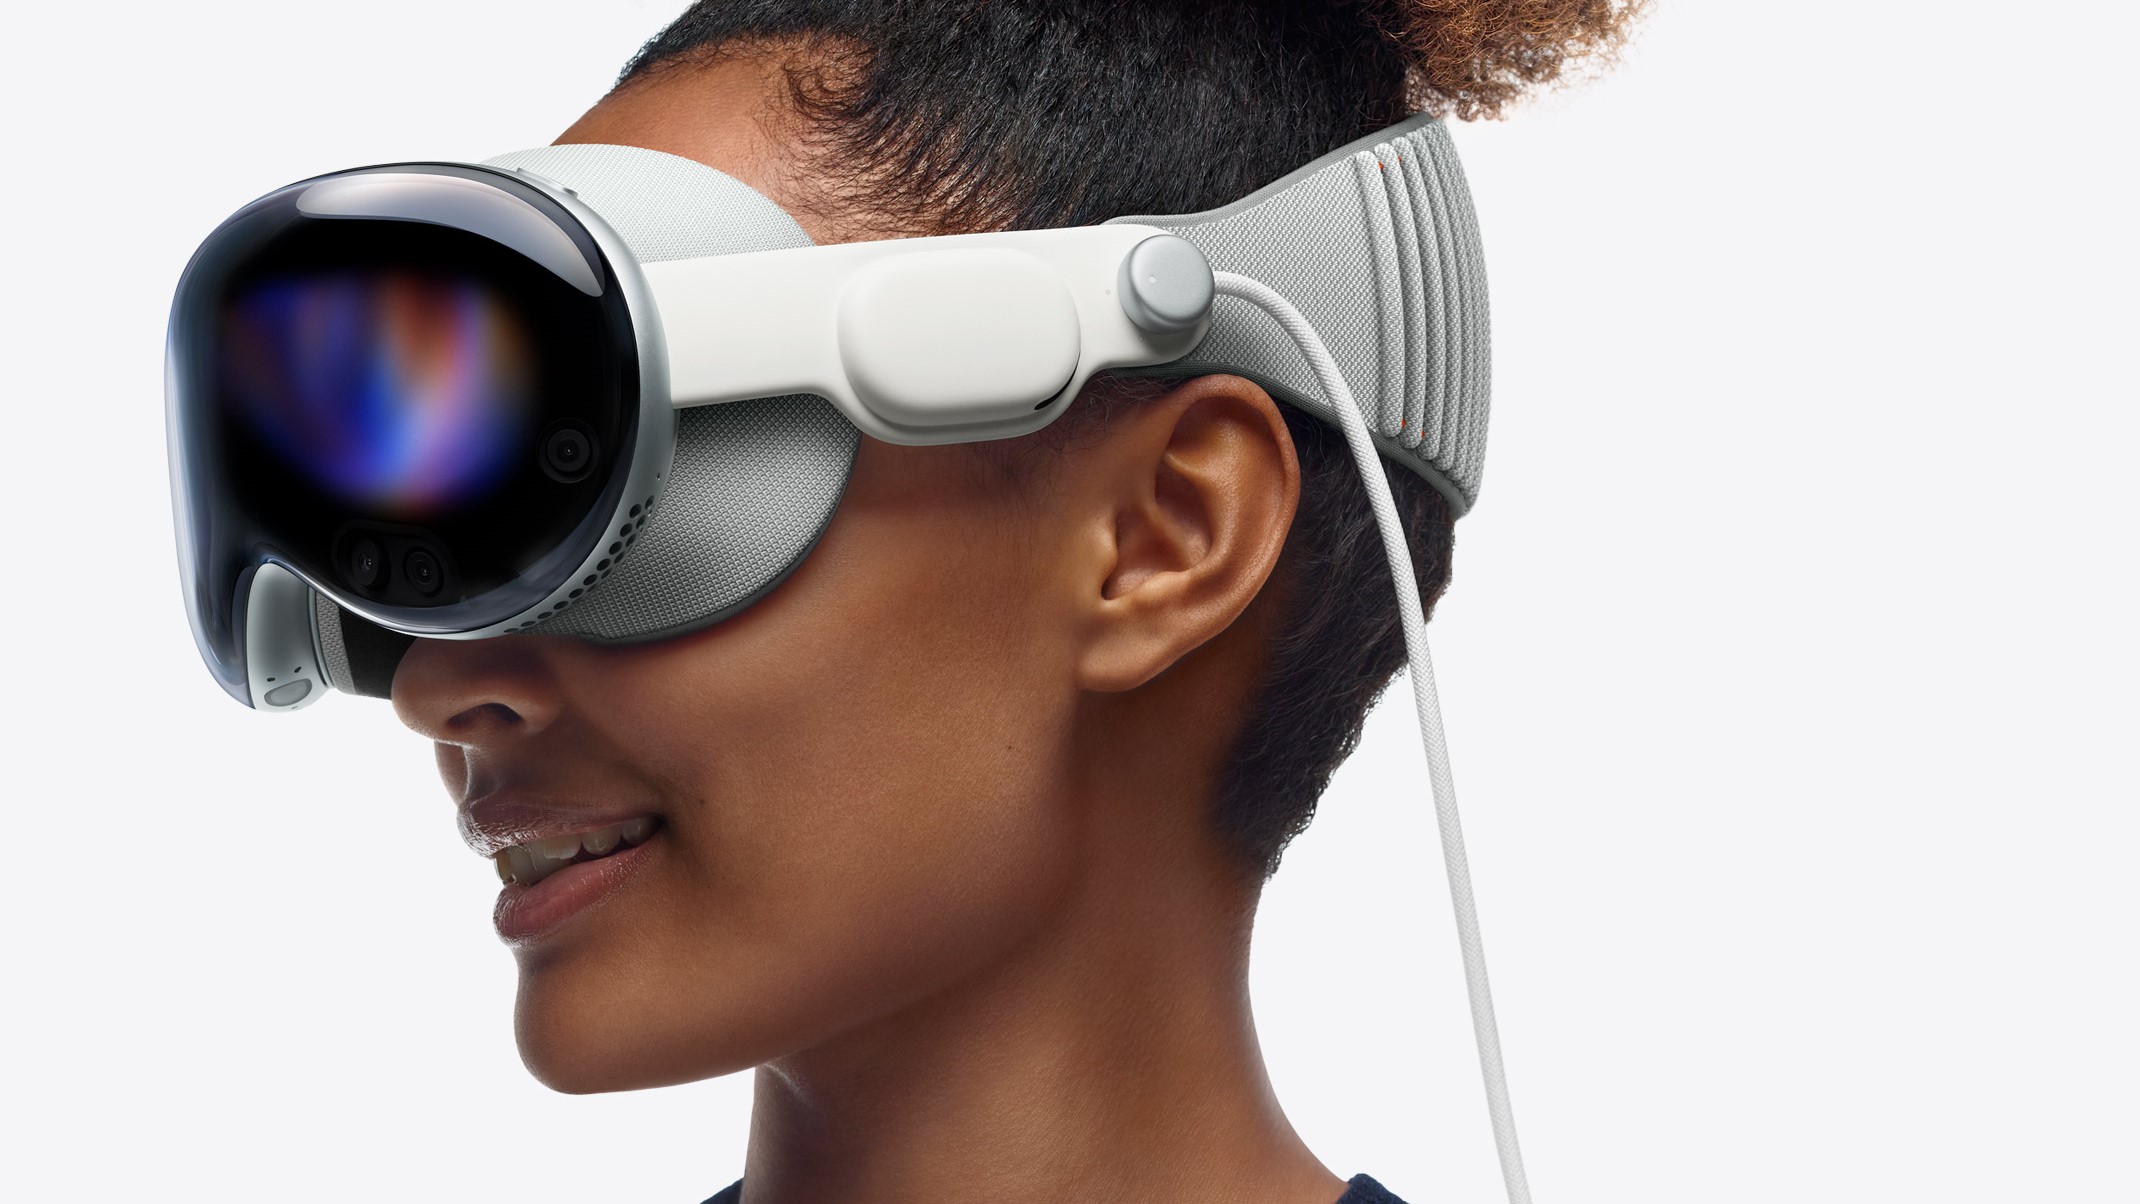 Study shows Apple Vision Pro return rates higher than anticipated